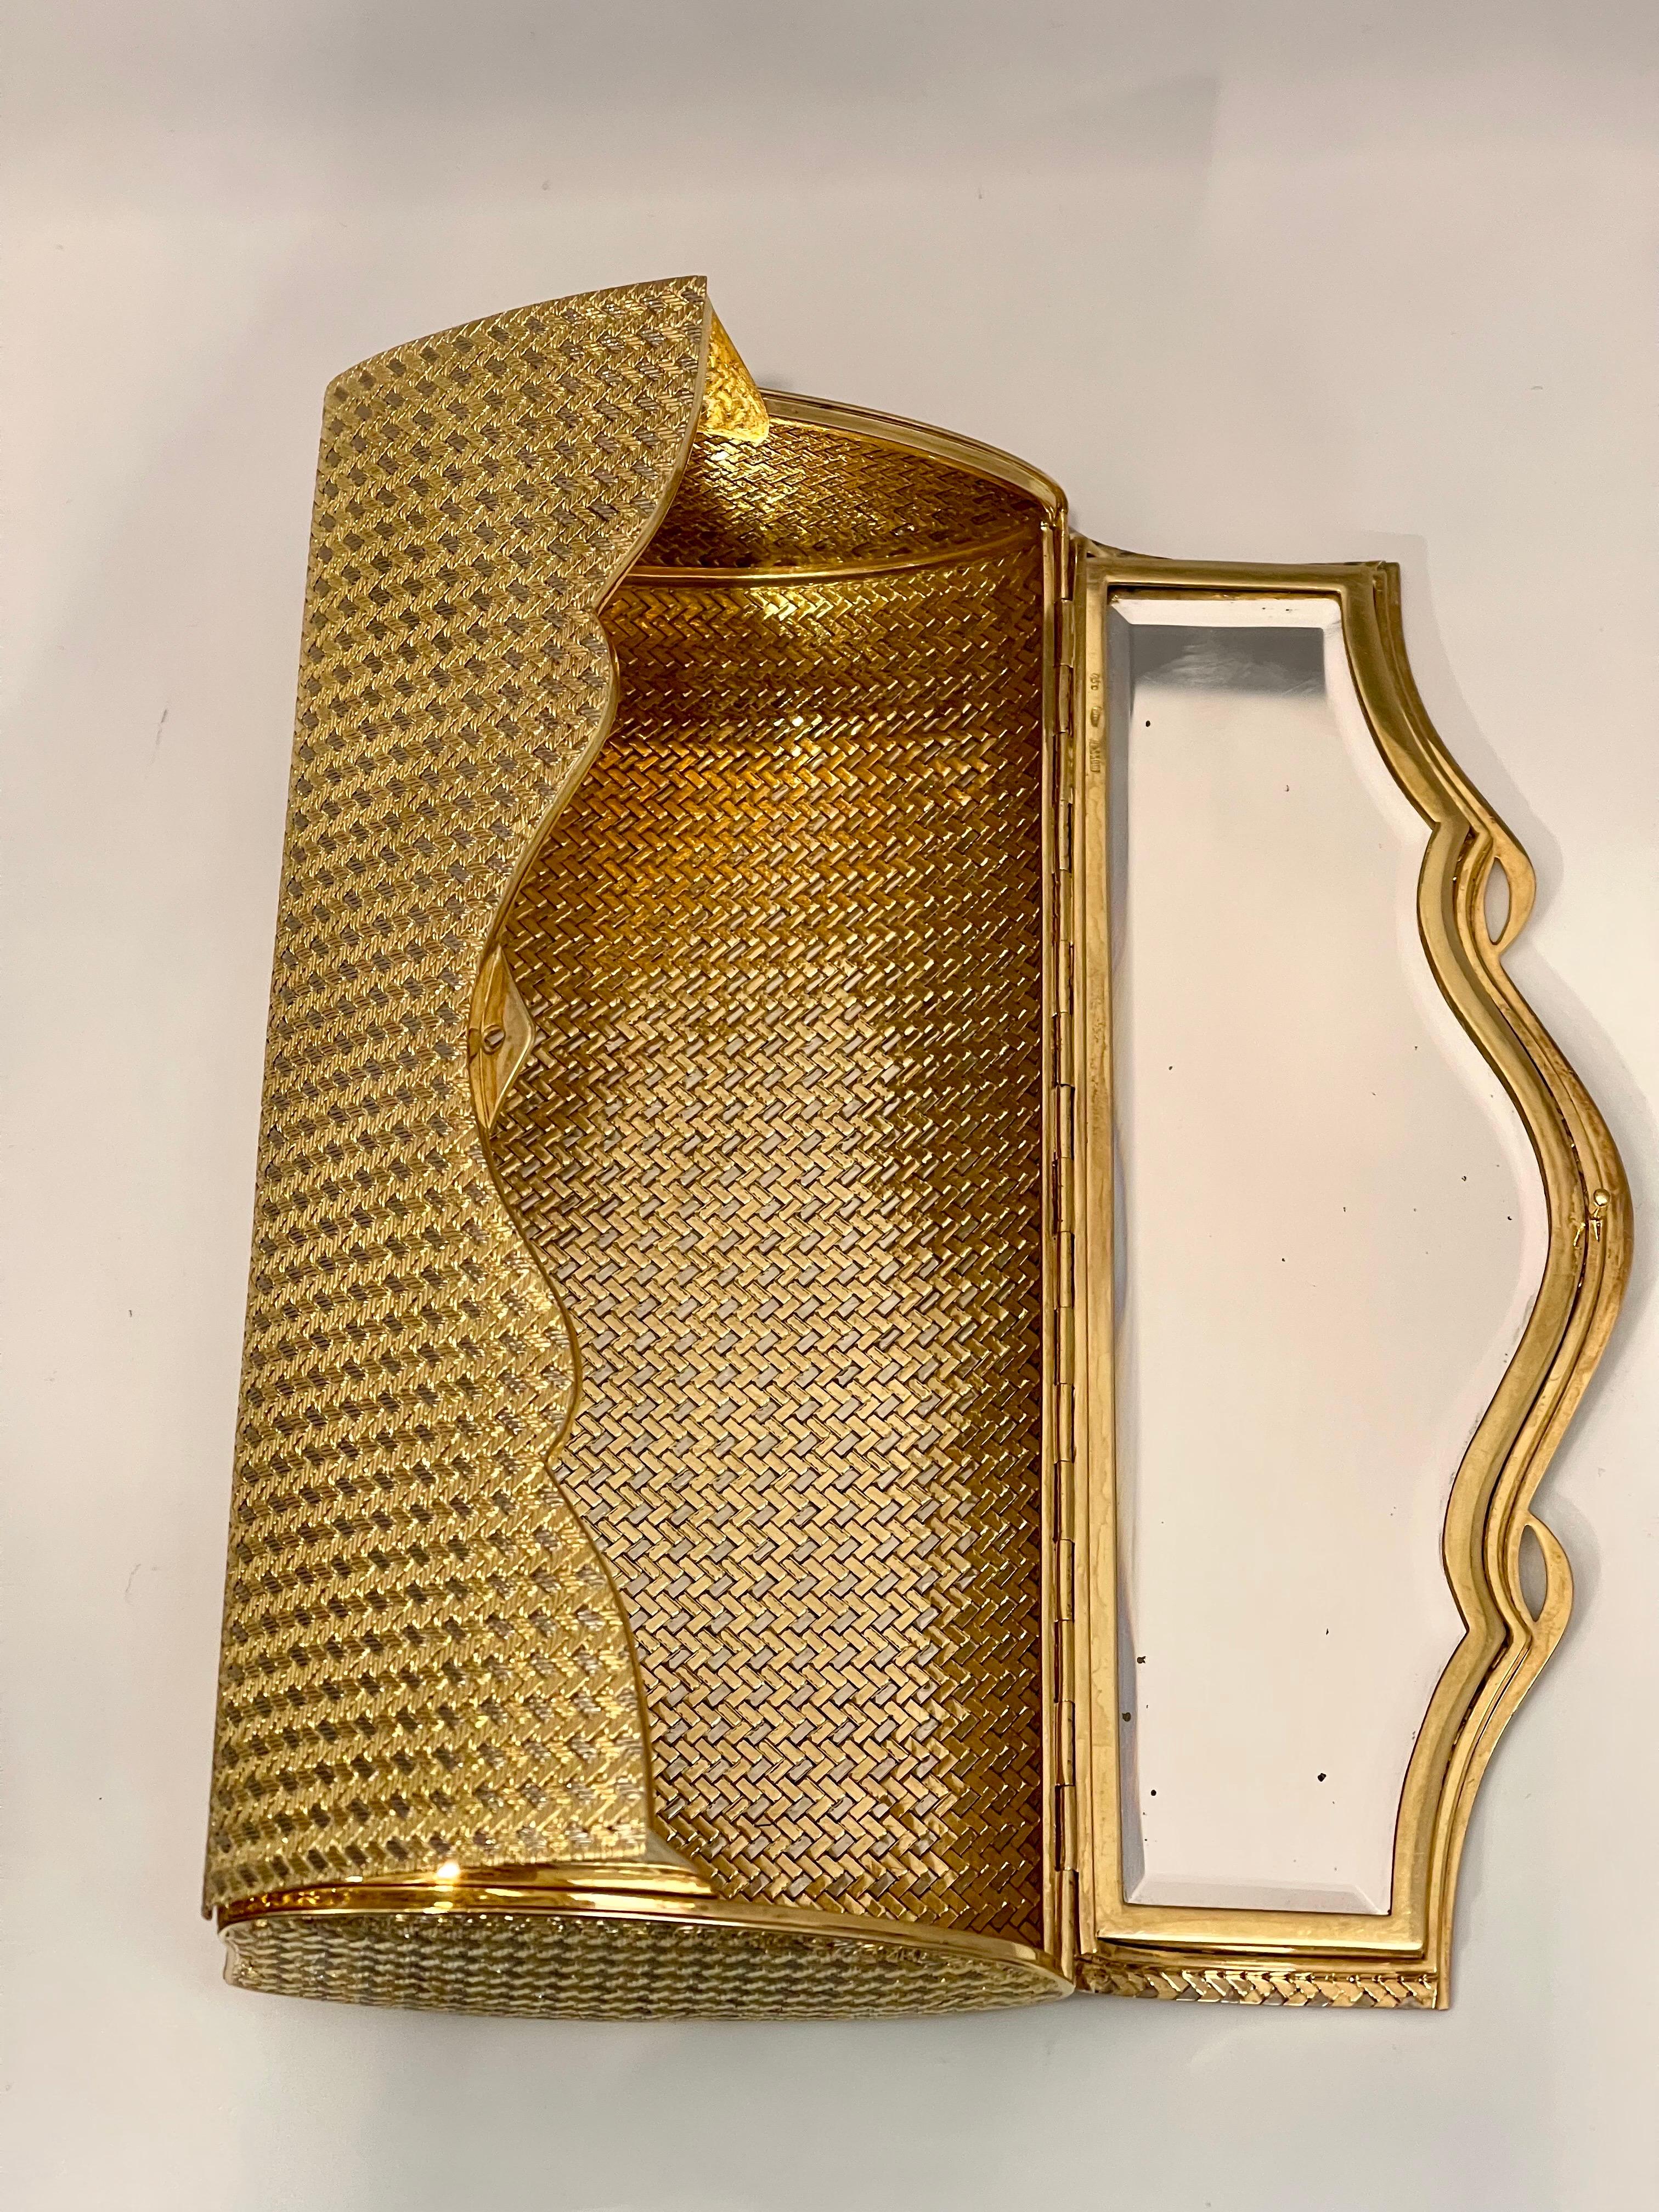 Van Cleef & Arpels 18K Yellow Gold Mesh Clutch Handbag with Mirror Inside, Rare In Excellent Condition For Sale In New York, NY